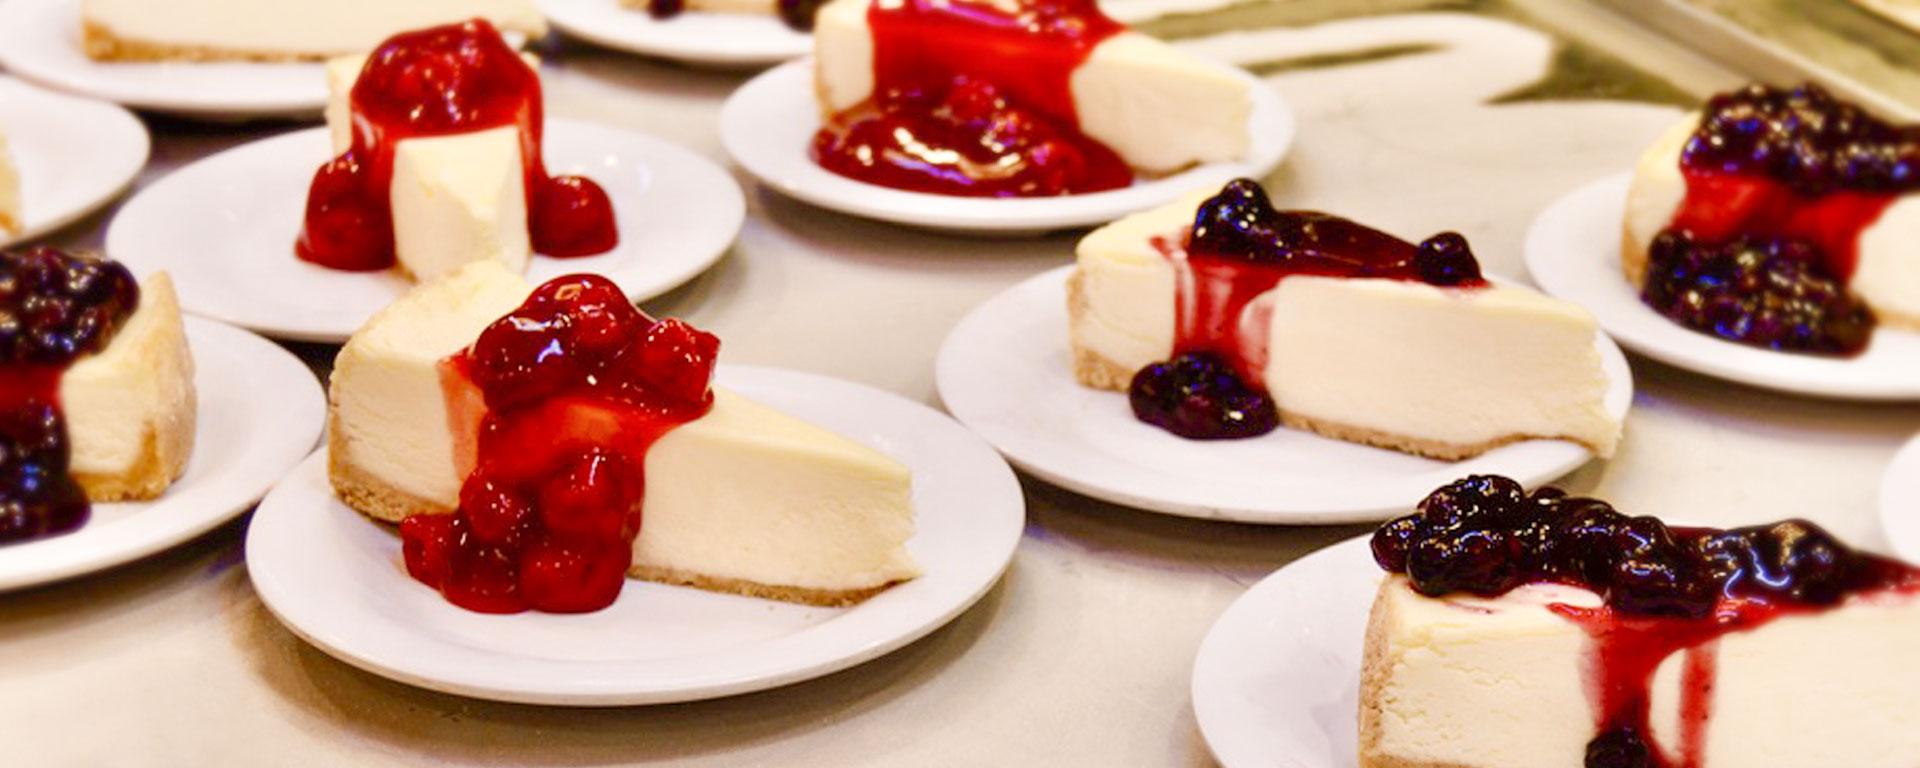 Cheesecake ready to be served